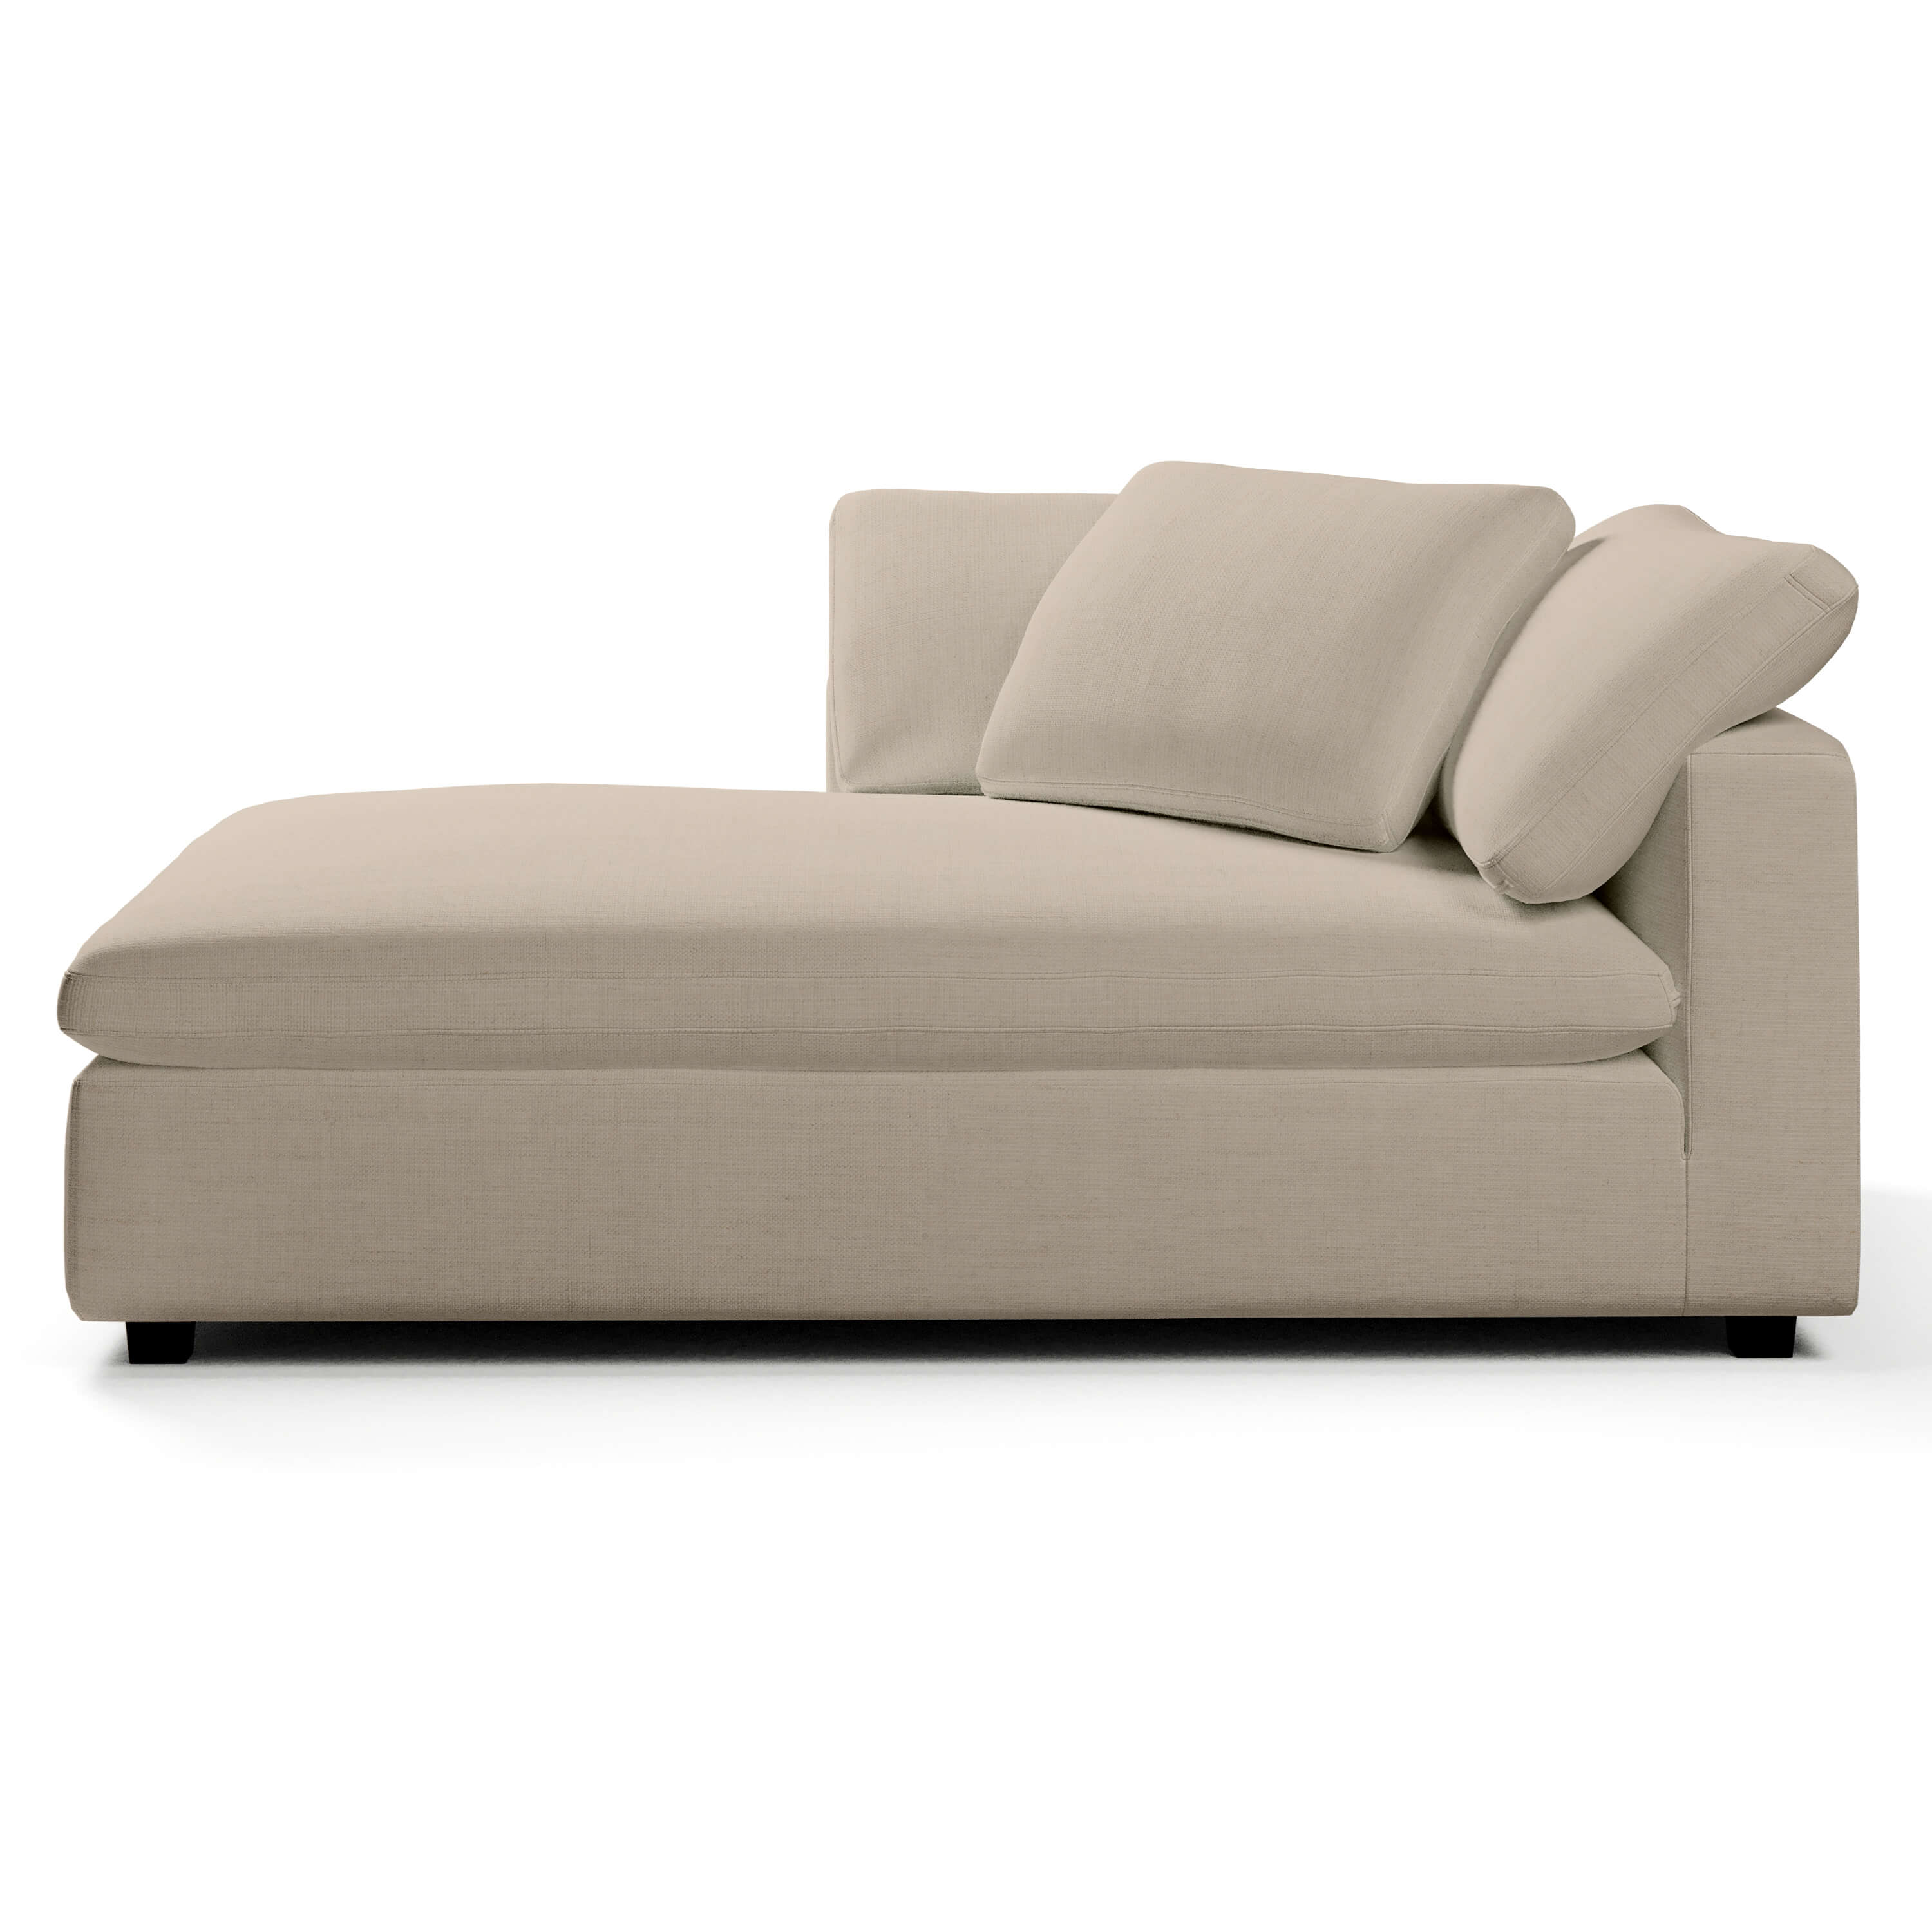 Comfy Chaise Chair - Left-Arm